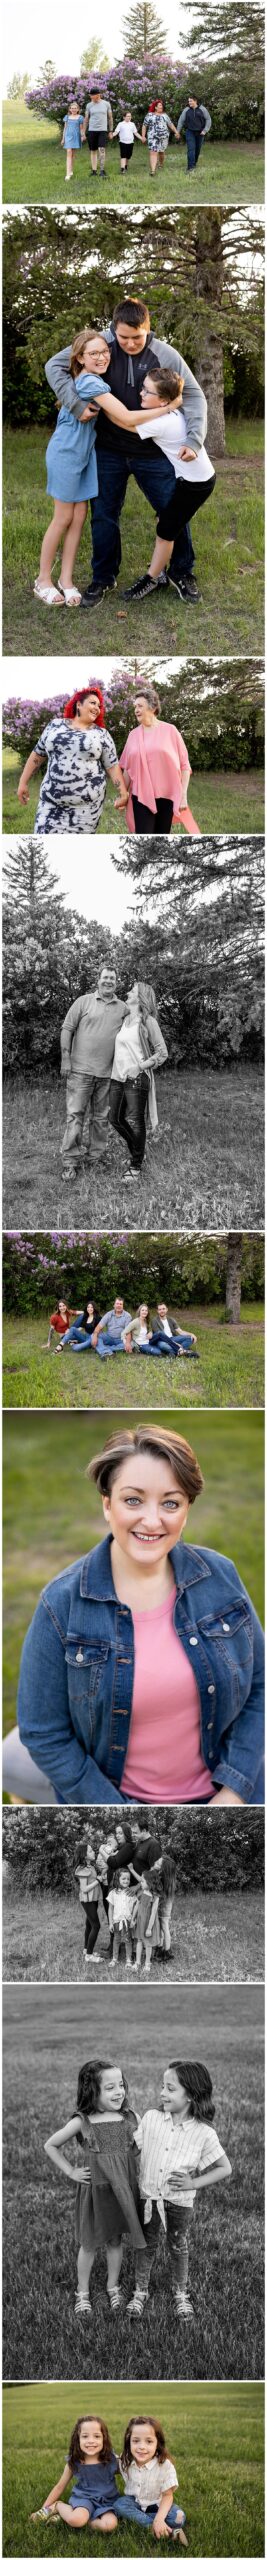 Several photos taken at a North Dakota park by Williston based family photographer, Kellie Rochelle Photography, depict different family members posing with the family matriarch alongside their own children.